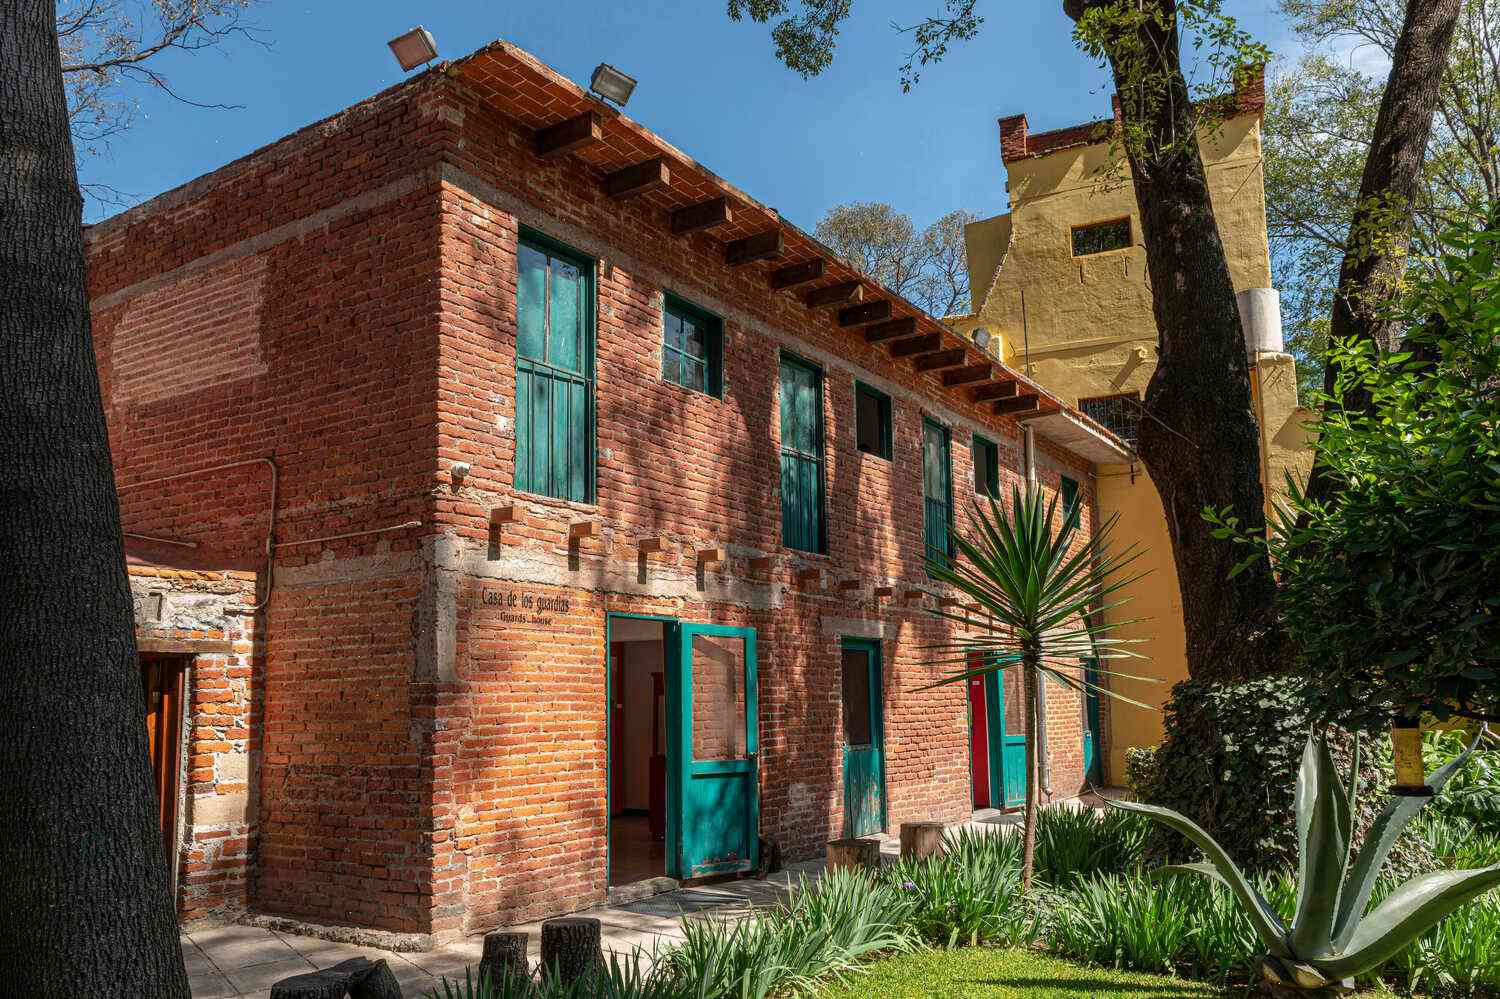 Diego Rivera’s House Museum: The Art of the Artist